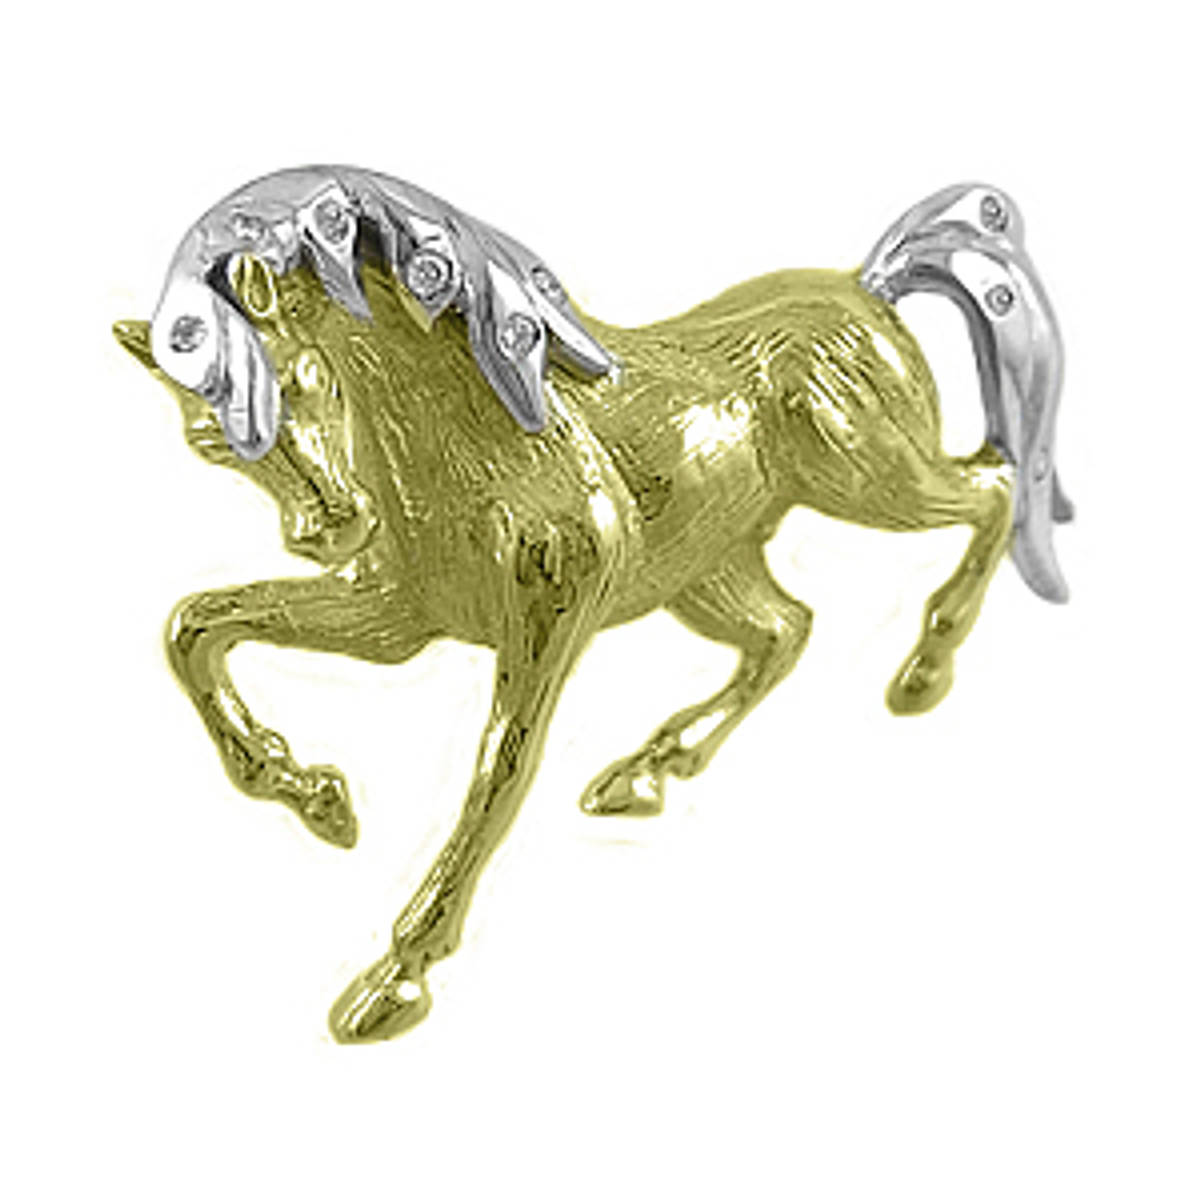 9 yellow gold with brilliant cut diamond horse brooch
Total diamond 0.06cts 
Width  3cm Height  2.5cm Made in Ireland